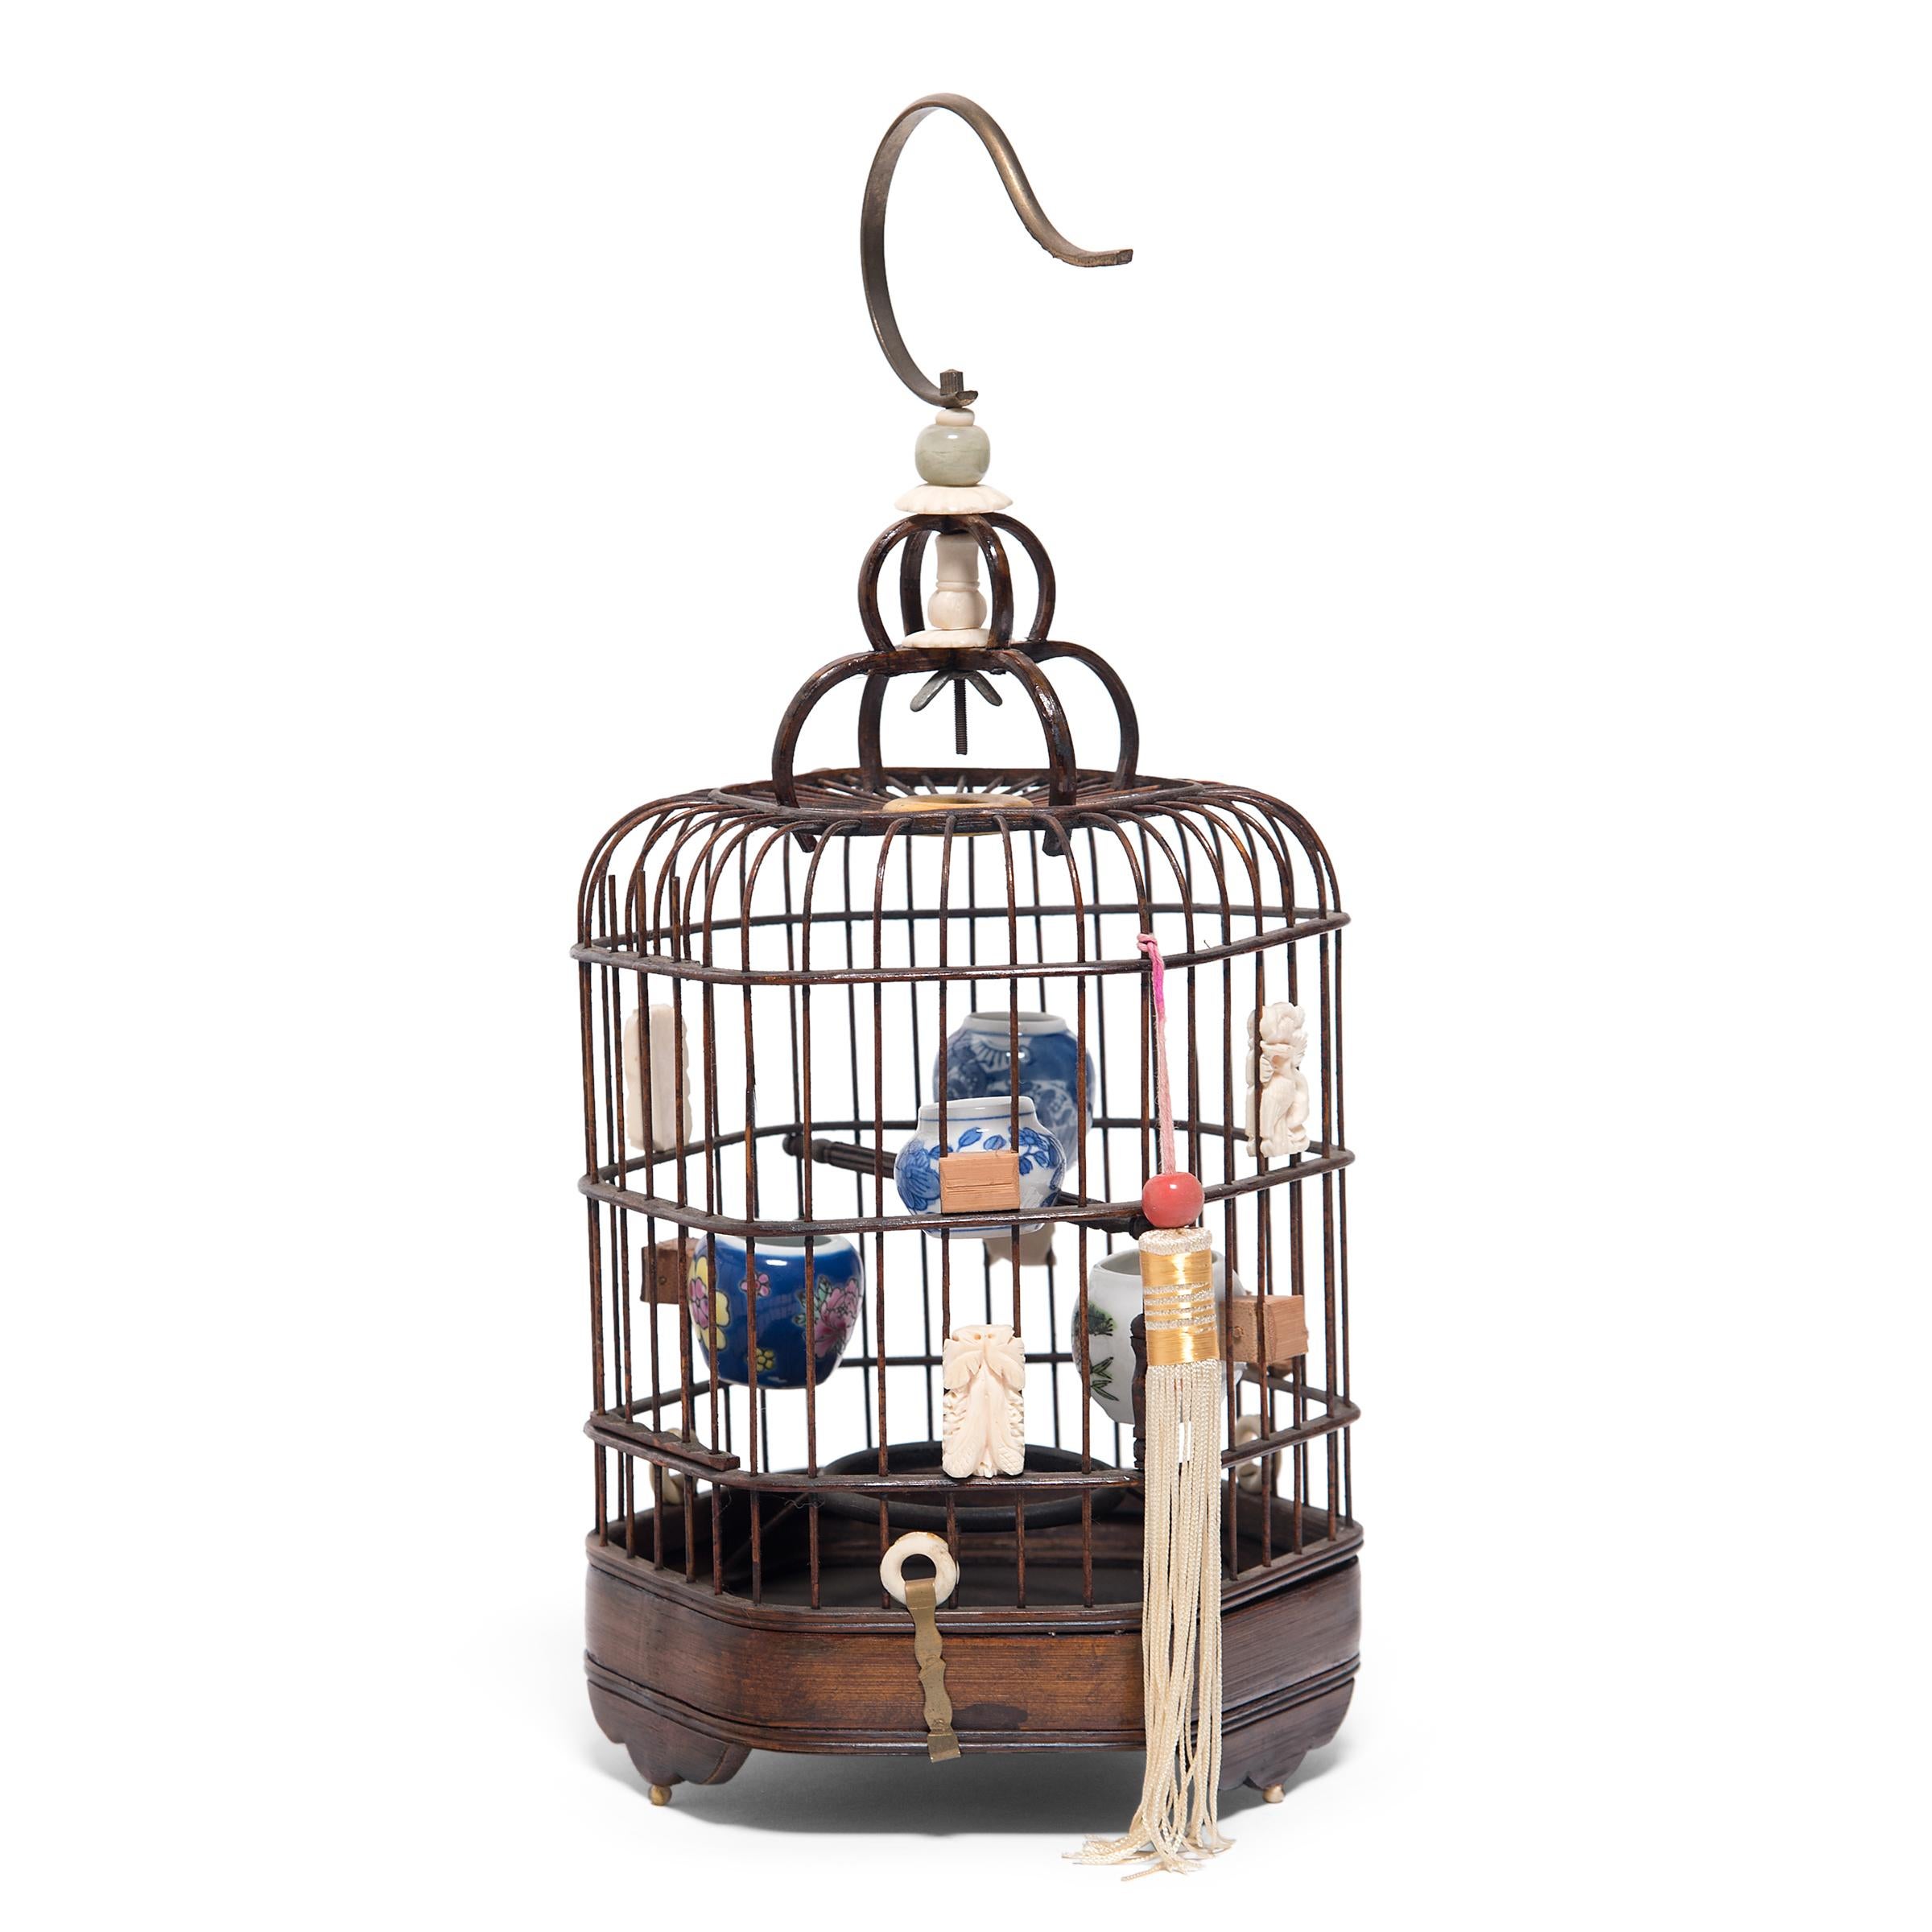 Perfectly proportioned and delightfully ornate, this wooden bird cage was once home to the pet of a Qing-dynasty aristocrat. Dated to the mid-19th century, the fine bird cage is carefully assembled from thin strips of wood and fitted with two